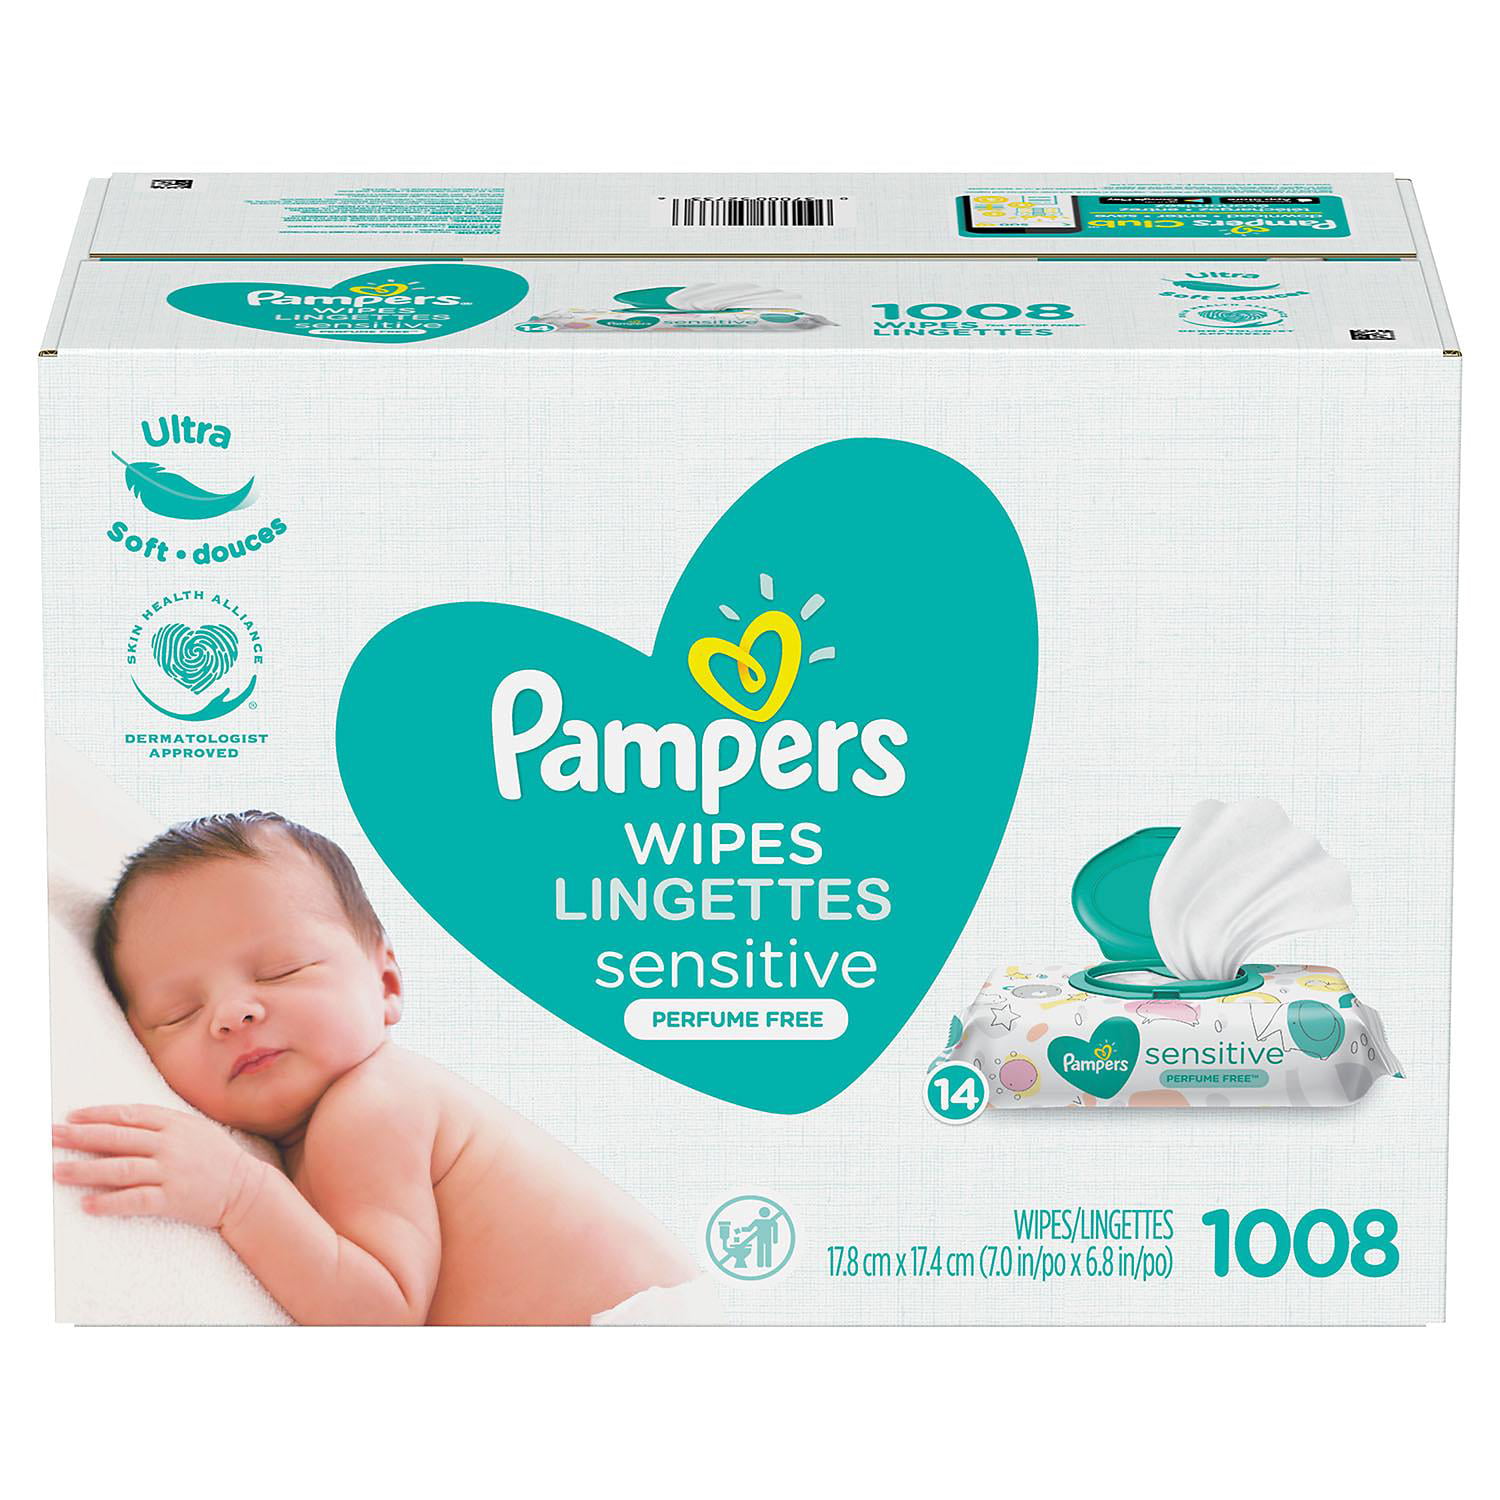 Pampers Sensitive Protect Baby Wipes 4 8 12 15 Packs Wet Wipes 80 Wipes per pack 